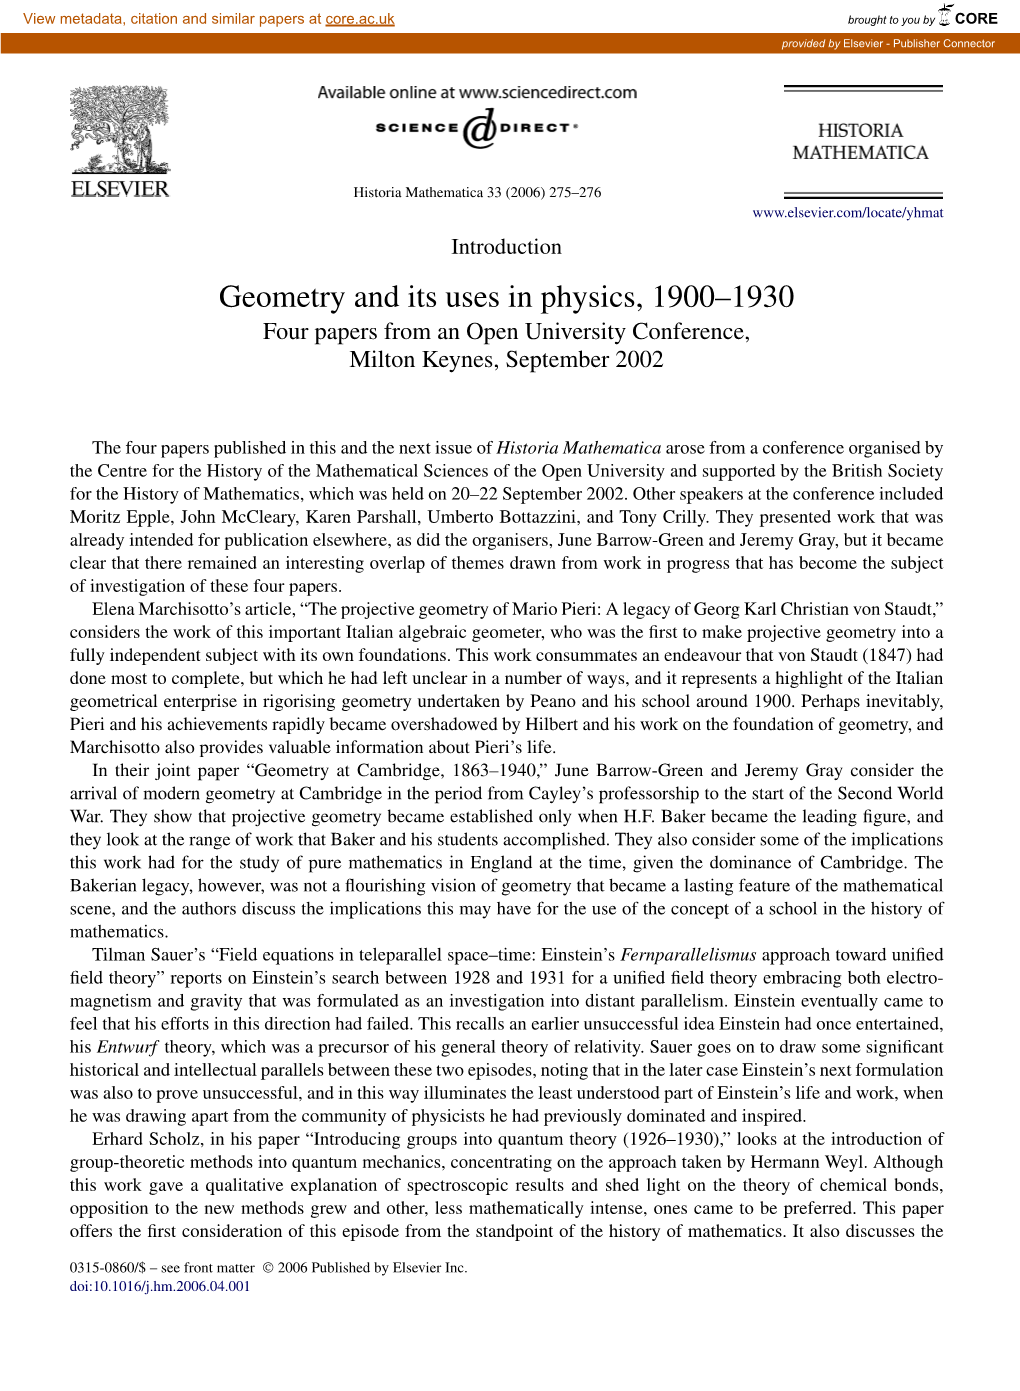 Geometry and Its Uses in Physics, 1900–1930 Four Papers from an Open University Conference, Milton Keynes, September 2002